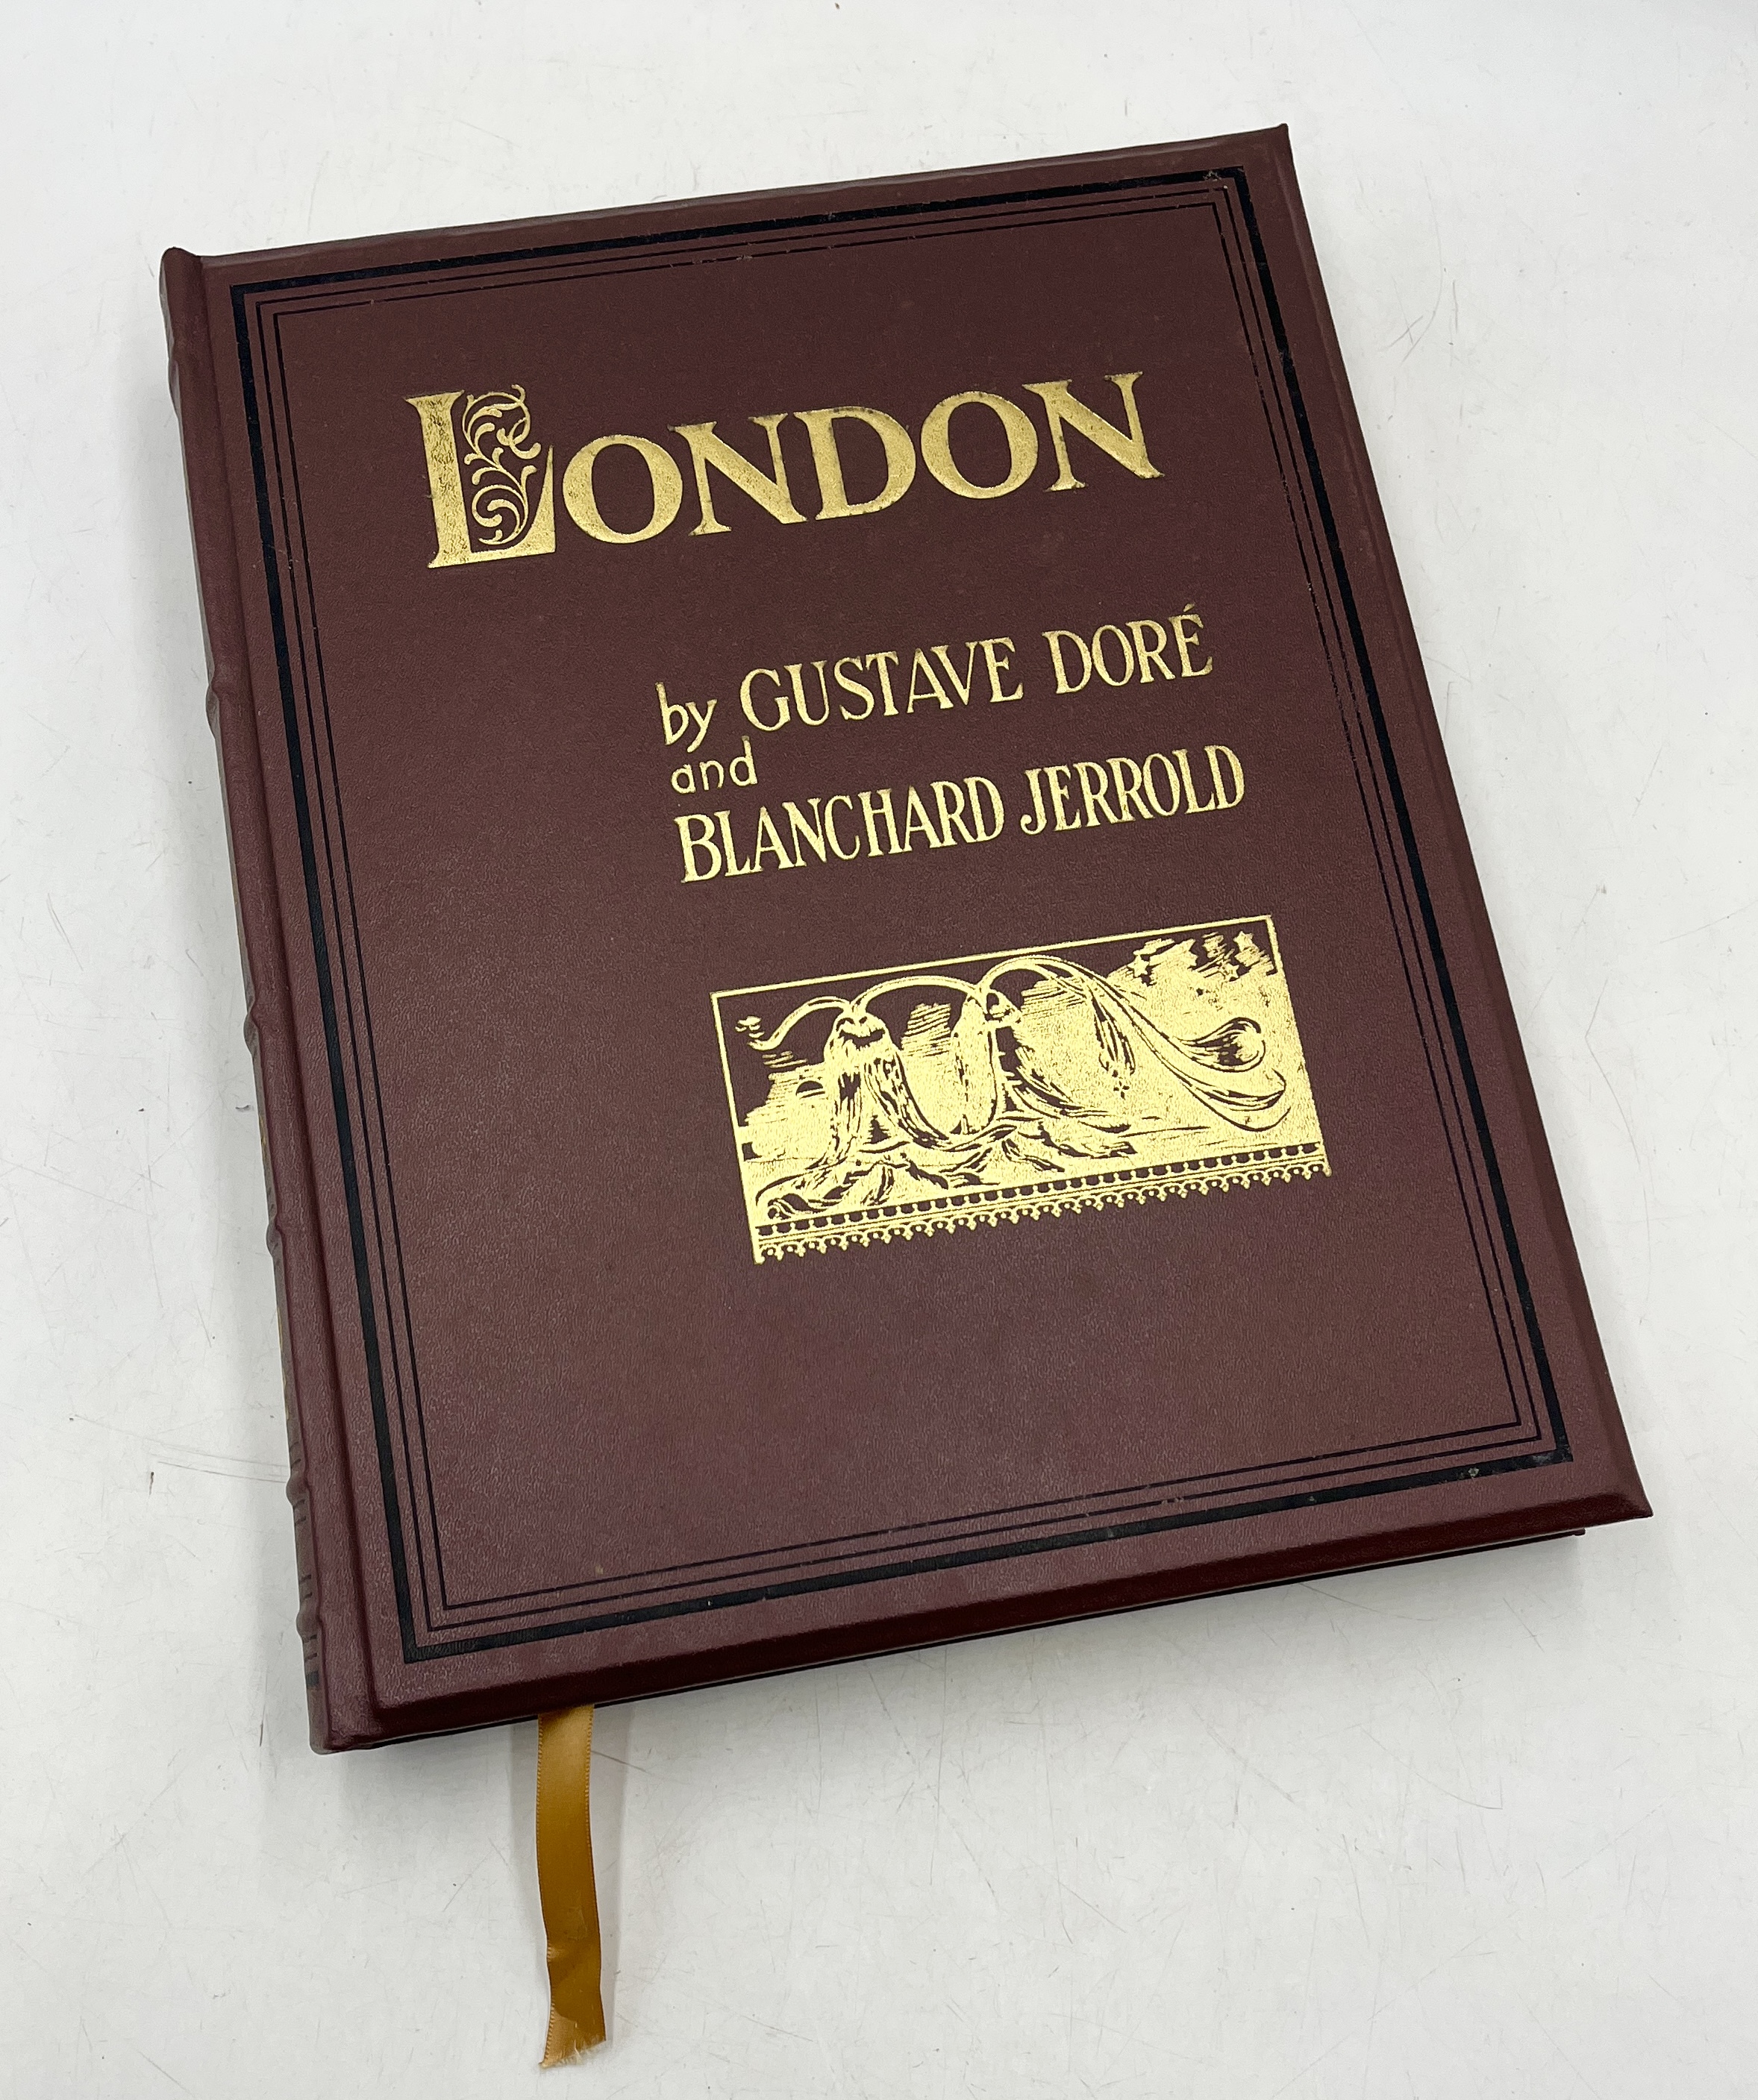 Gustave Dore; Dore's London, Easton Press, 2011 in original slipcase, number 66 of 400 copies` - Image 2 of 10